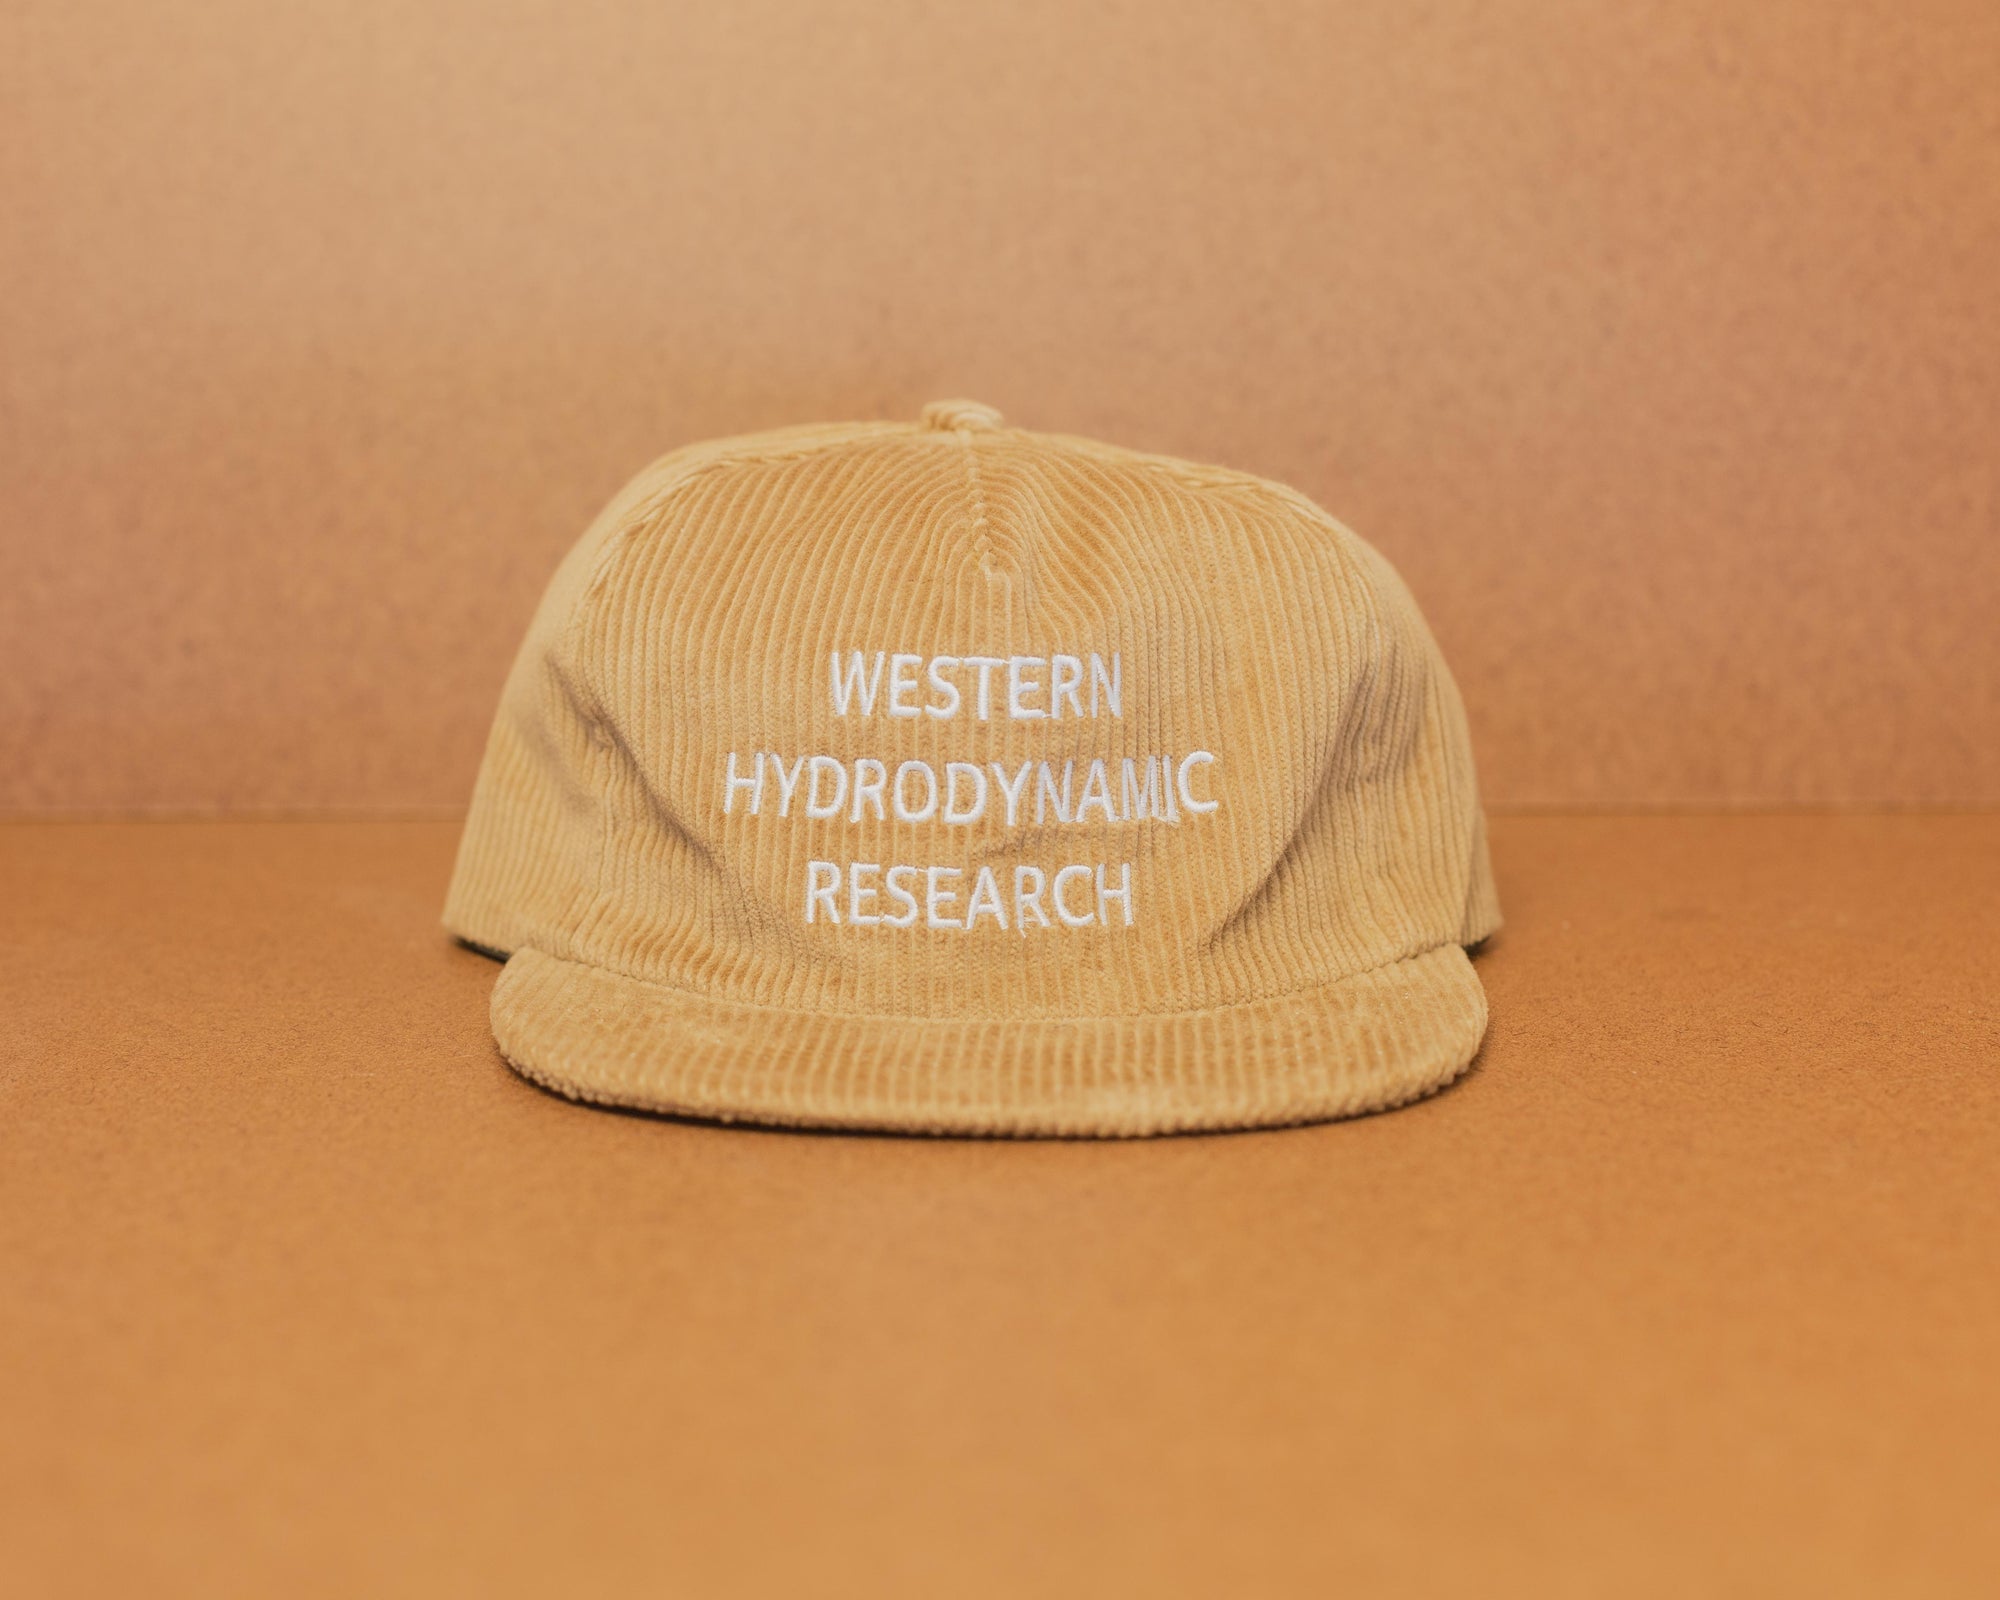 Western Hydrodynamic Research- Whale Cord Hat (Beige) front view brown background